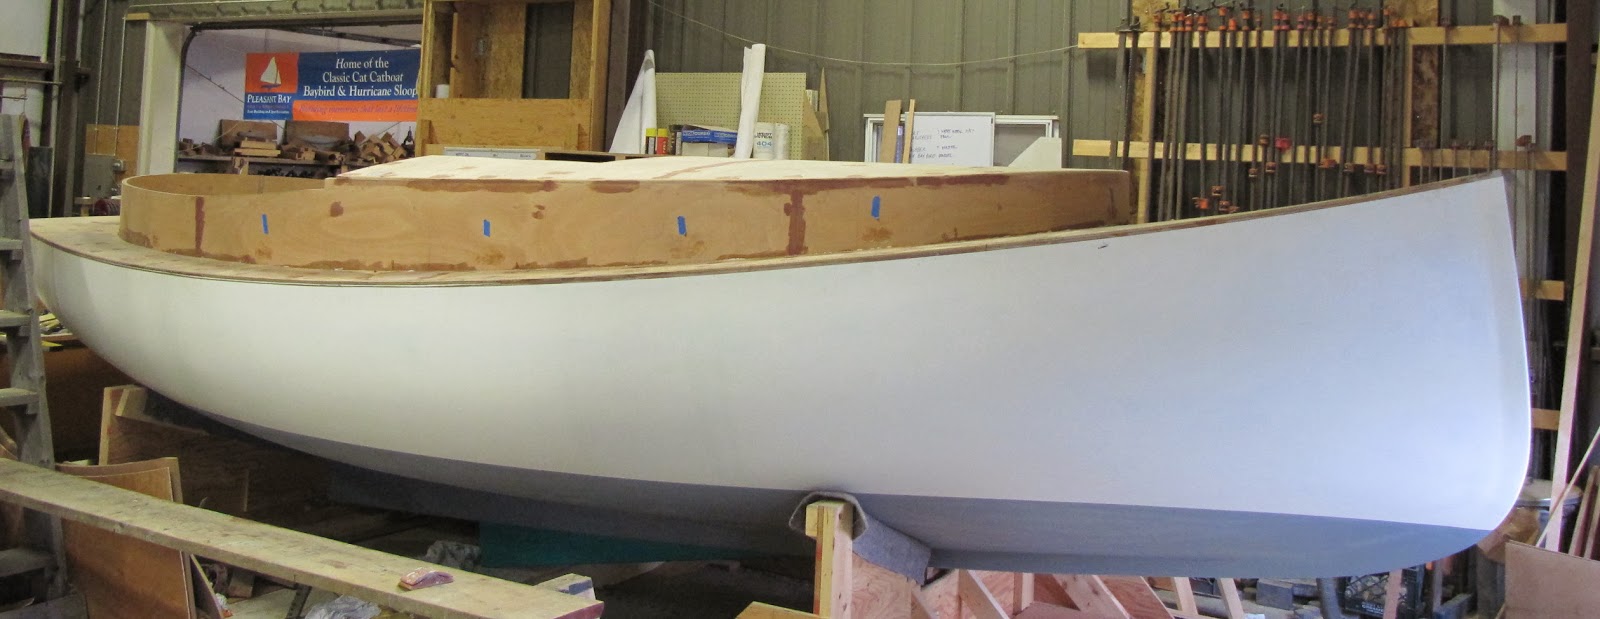 New DIY Boat: Learn Wooden boat building for dummies